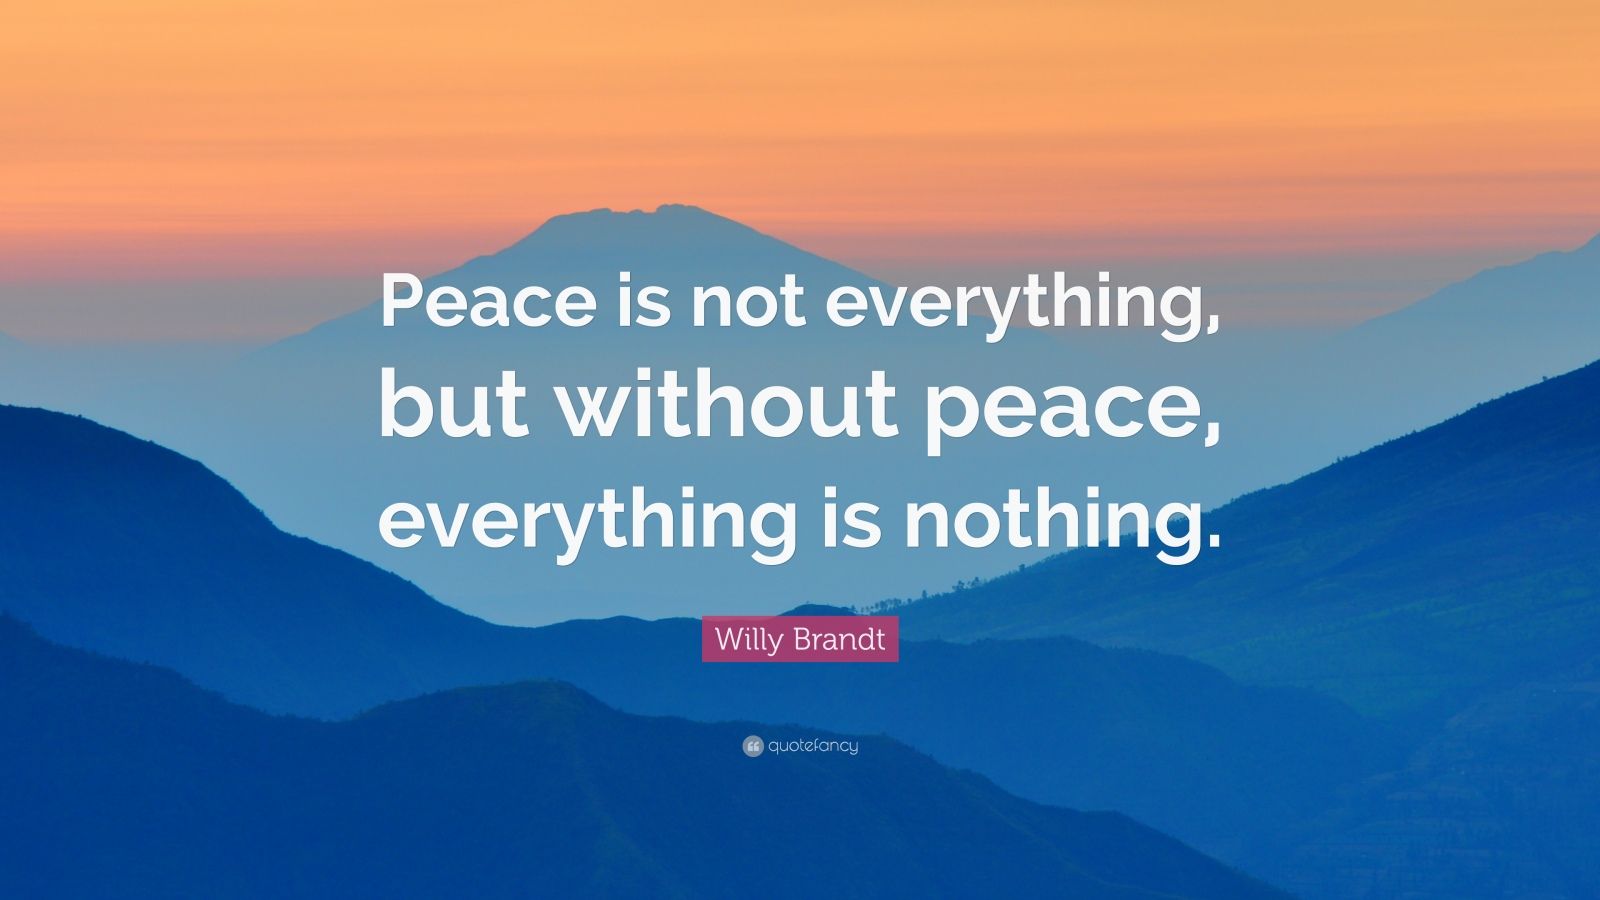 Willy Brandt Quote: “Peace is not everything, but without peace ...